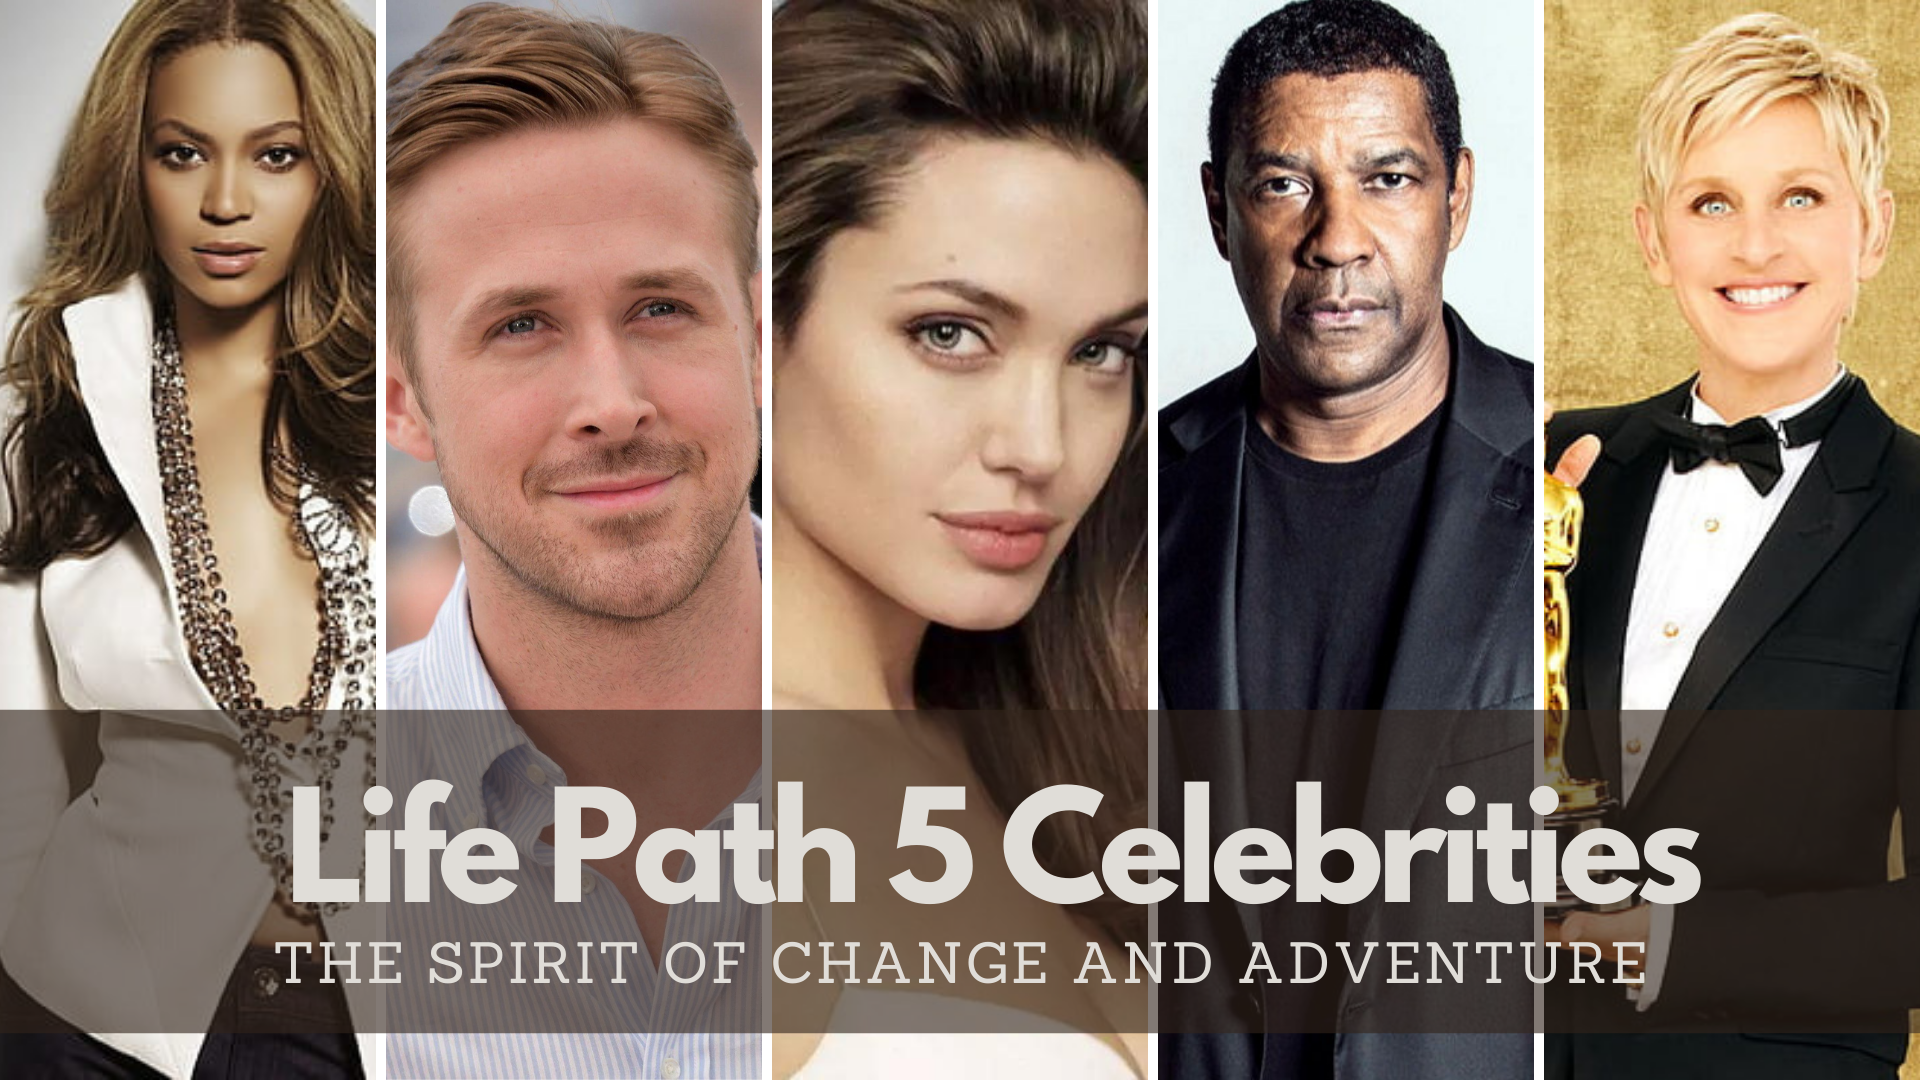 Life Path 5 Celebrities - The Spirit Of Change And Adventure